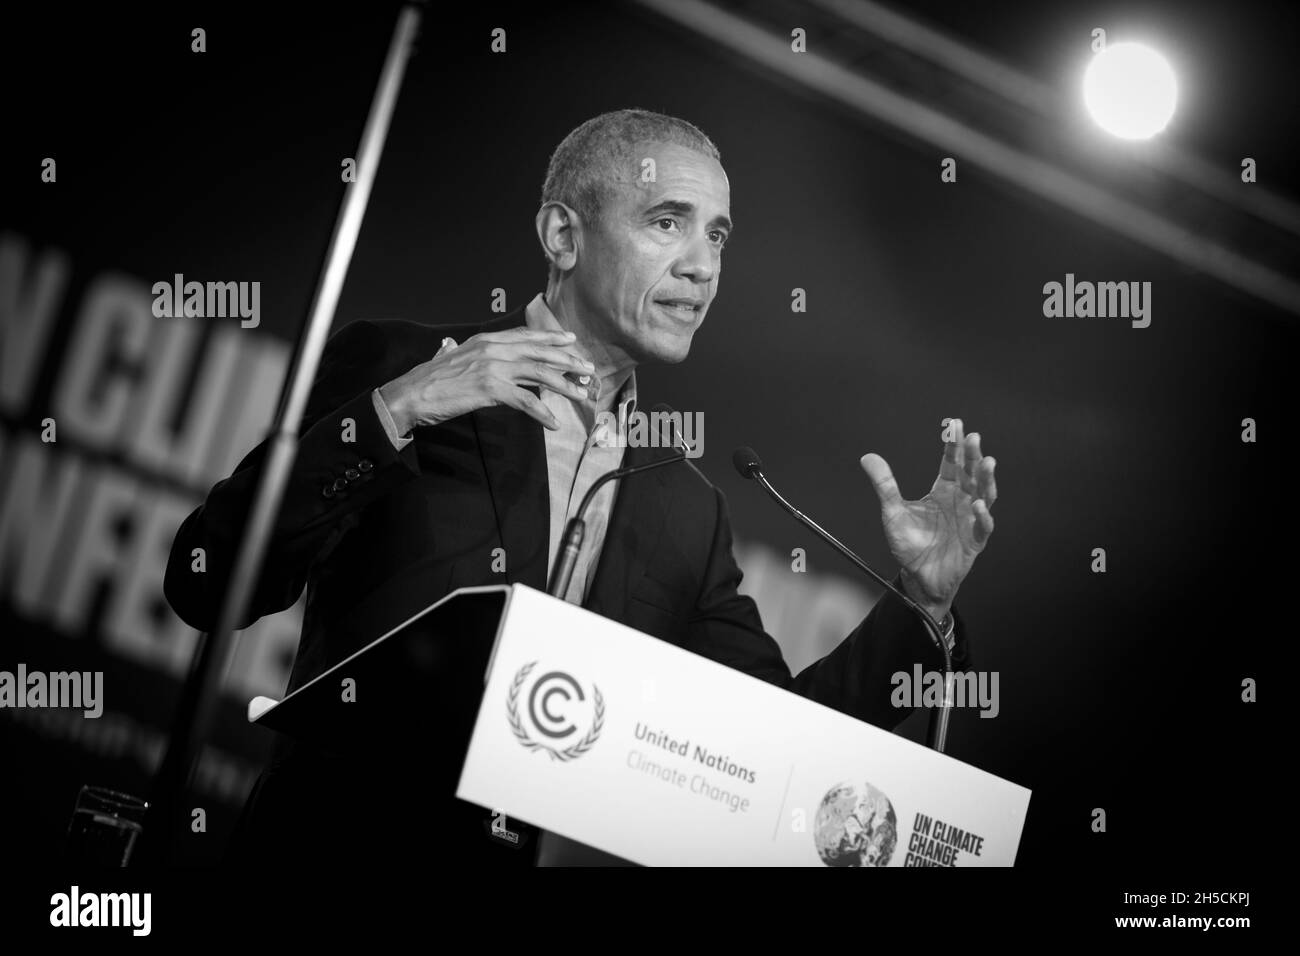 Glasgow, Scotland, UK. Barack Obama, former President of the United States of America, speaks at the 26th United Nations Climate Change Conference, known as COP26, in Glasgow, Scotland, UK, on 8 November 2021. Photo:Jeremy Sutton-Hibbert/Alamy Live News. Stock Photo